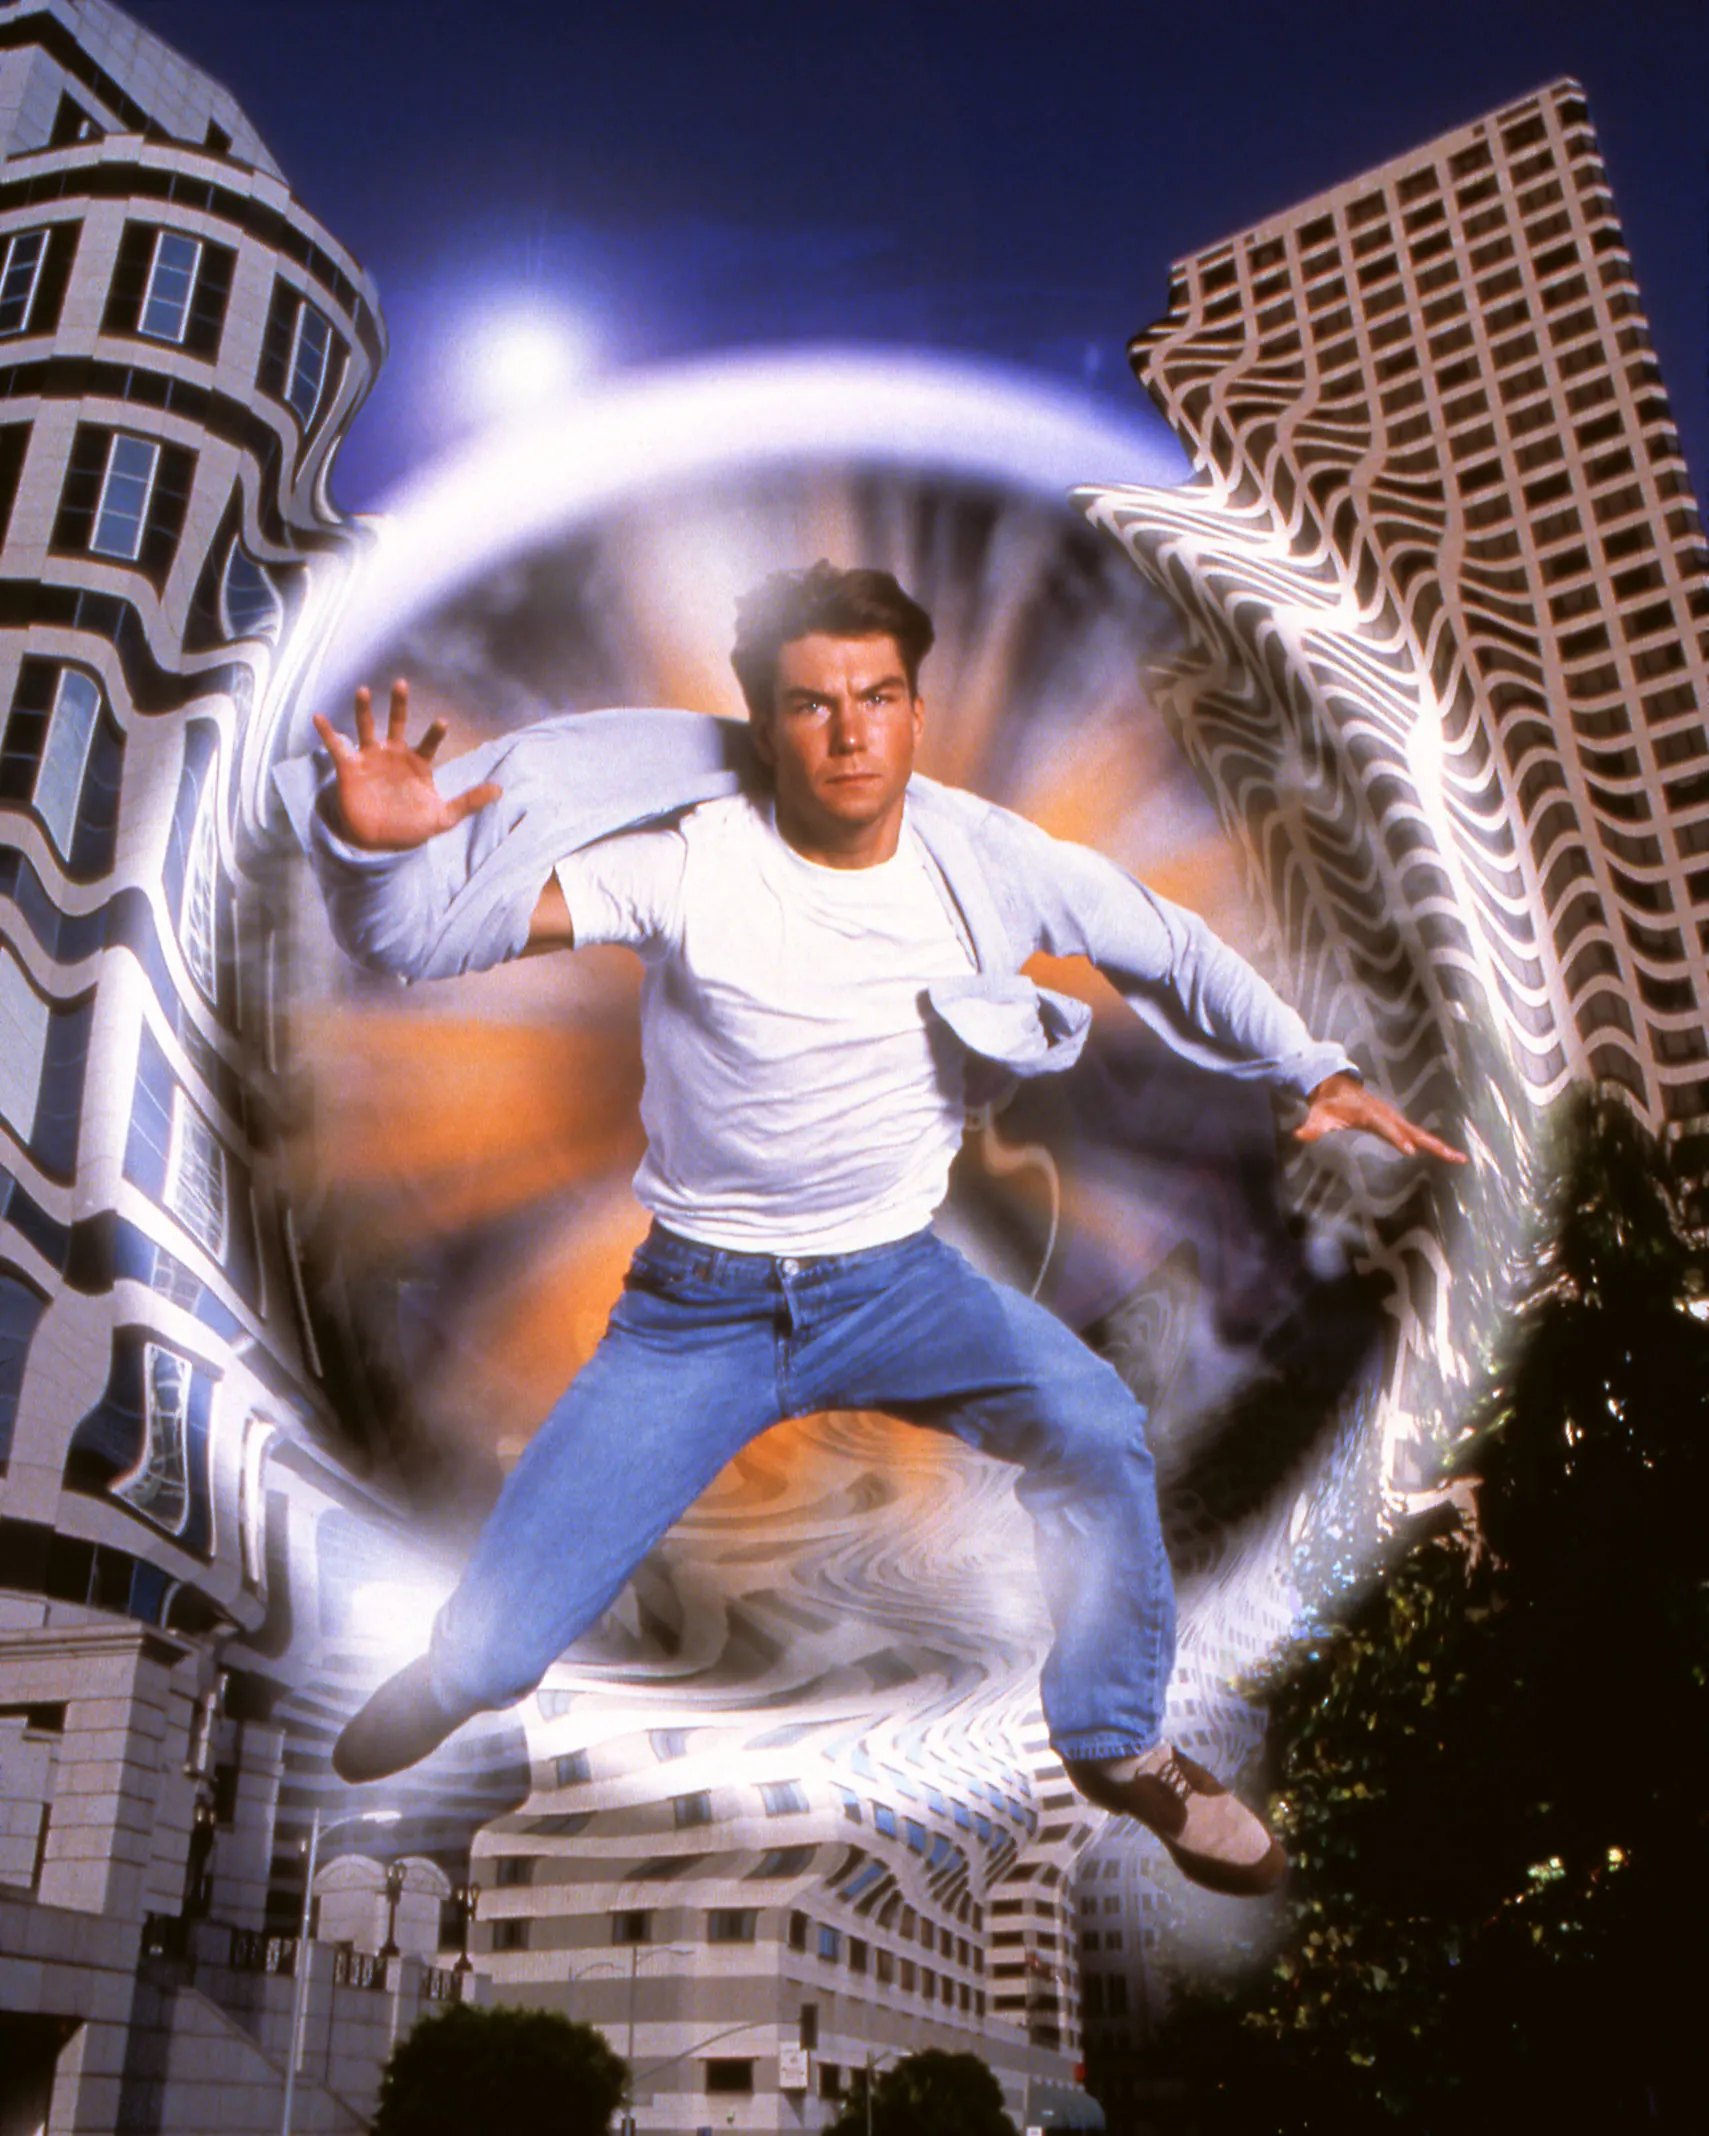 Sliders promo photo with Quinn Mallory (Jerry O'Connell) emerging from the vortex